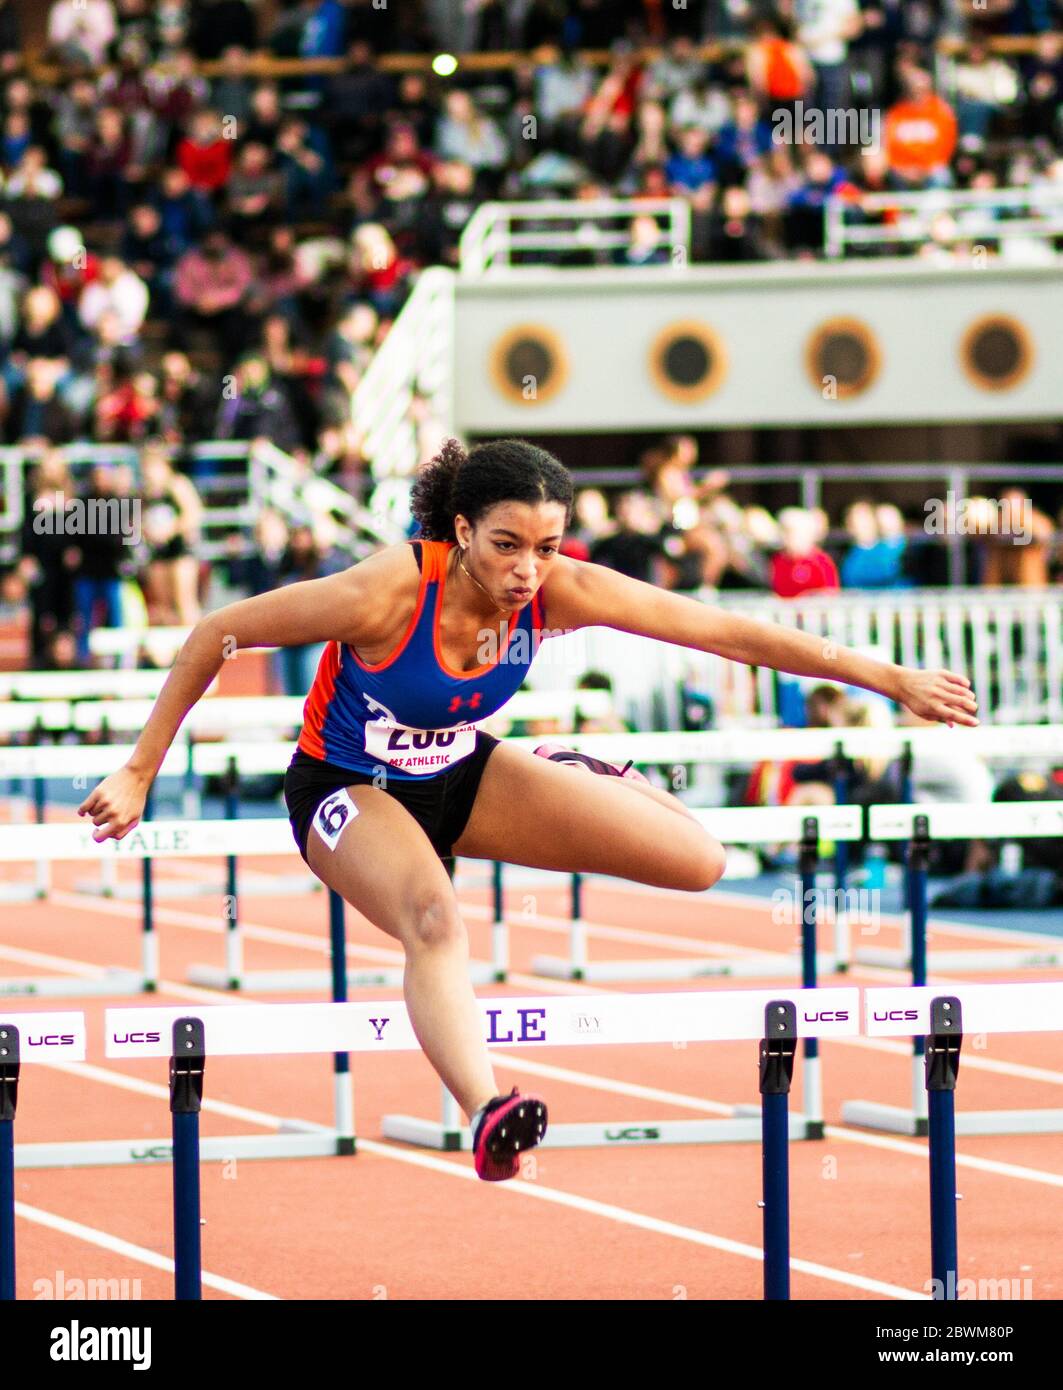 New Haven, Connecticut, USA - 12 January 2019: A female high school hurdler is racing at an indoor track meet. Stock Photo